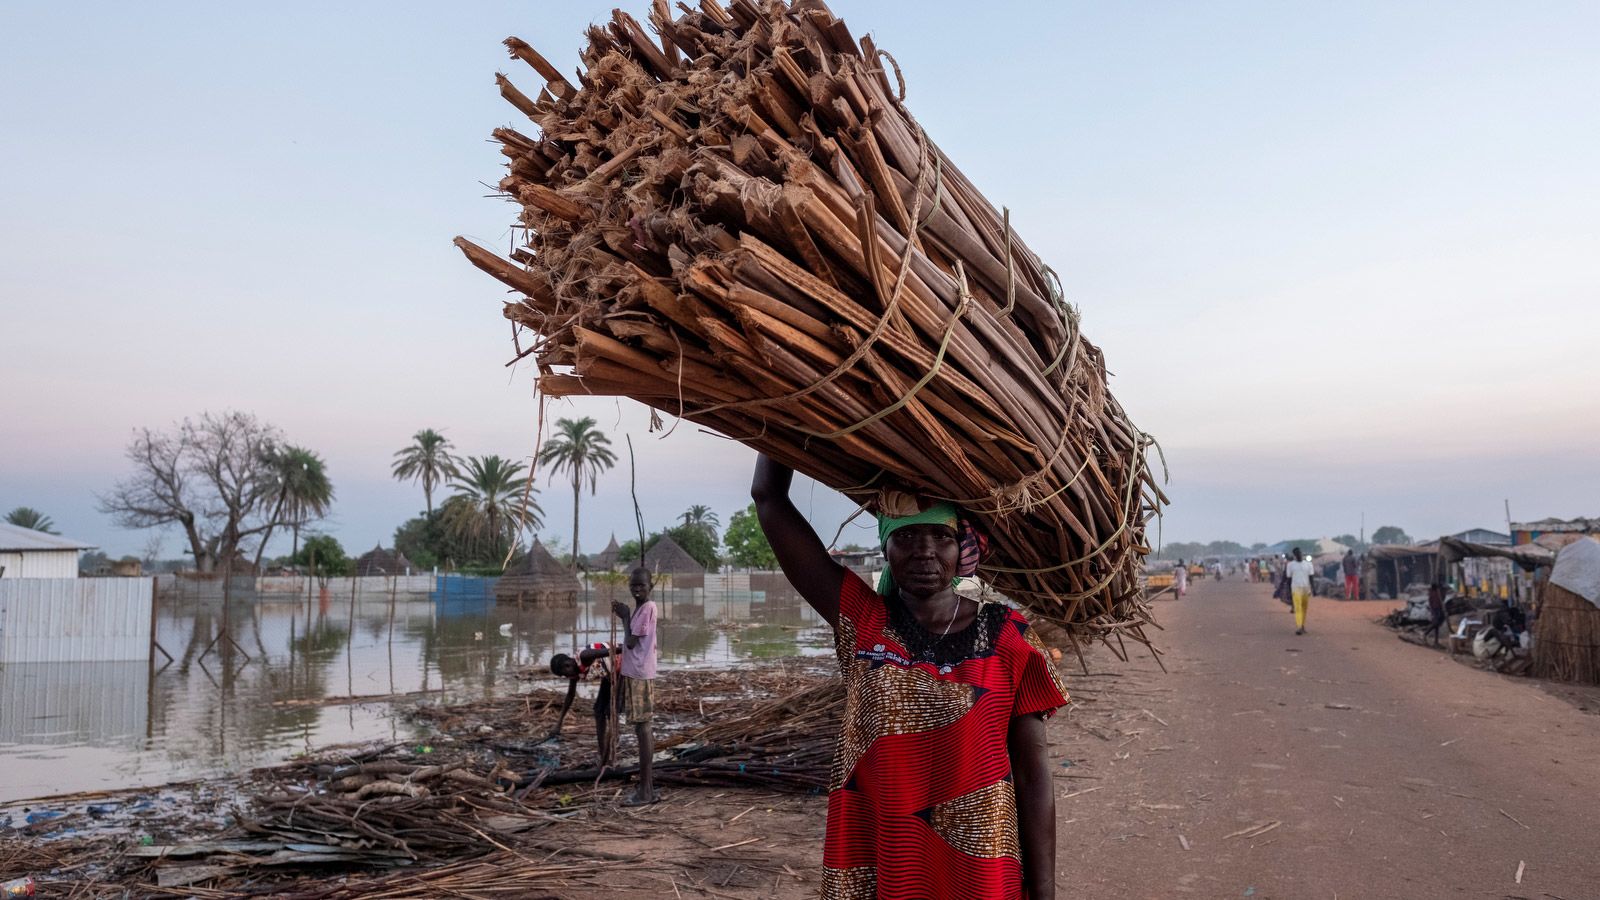 A woman carries dried wood to build a temporary shelter for her displaced family. "I now just need to find some plastic sheets," she told Rich.